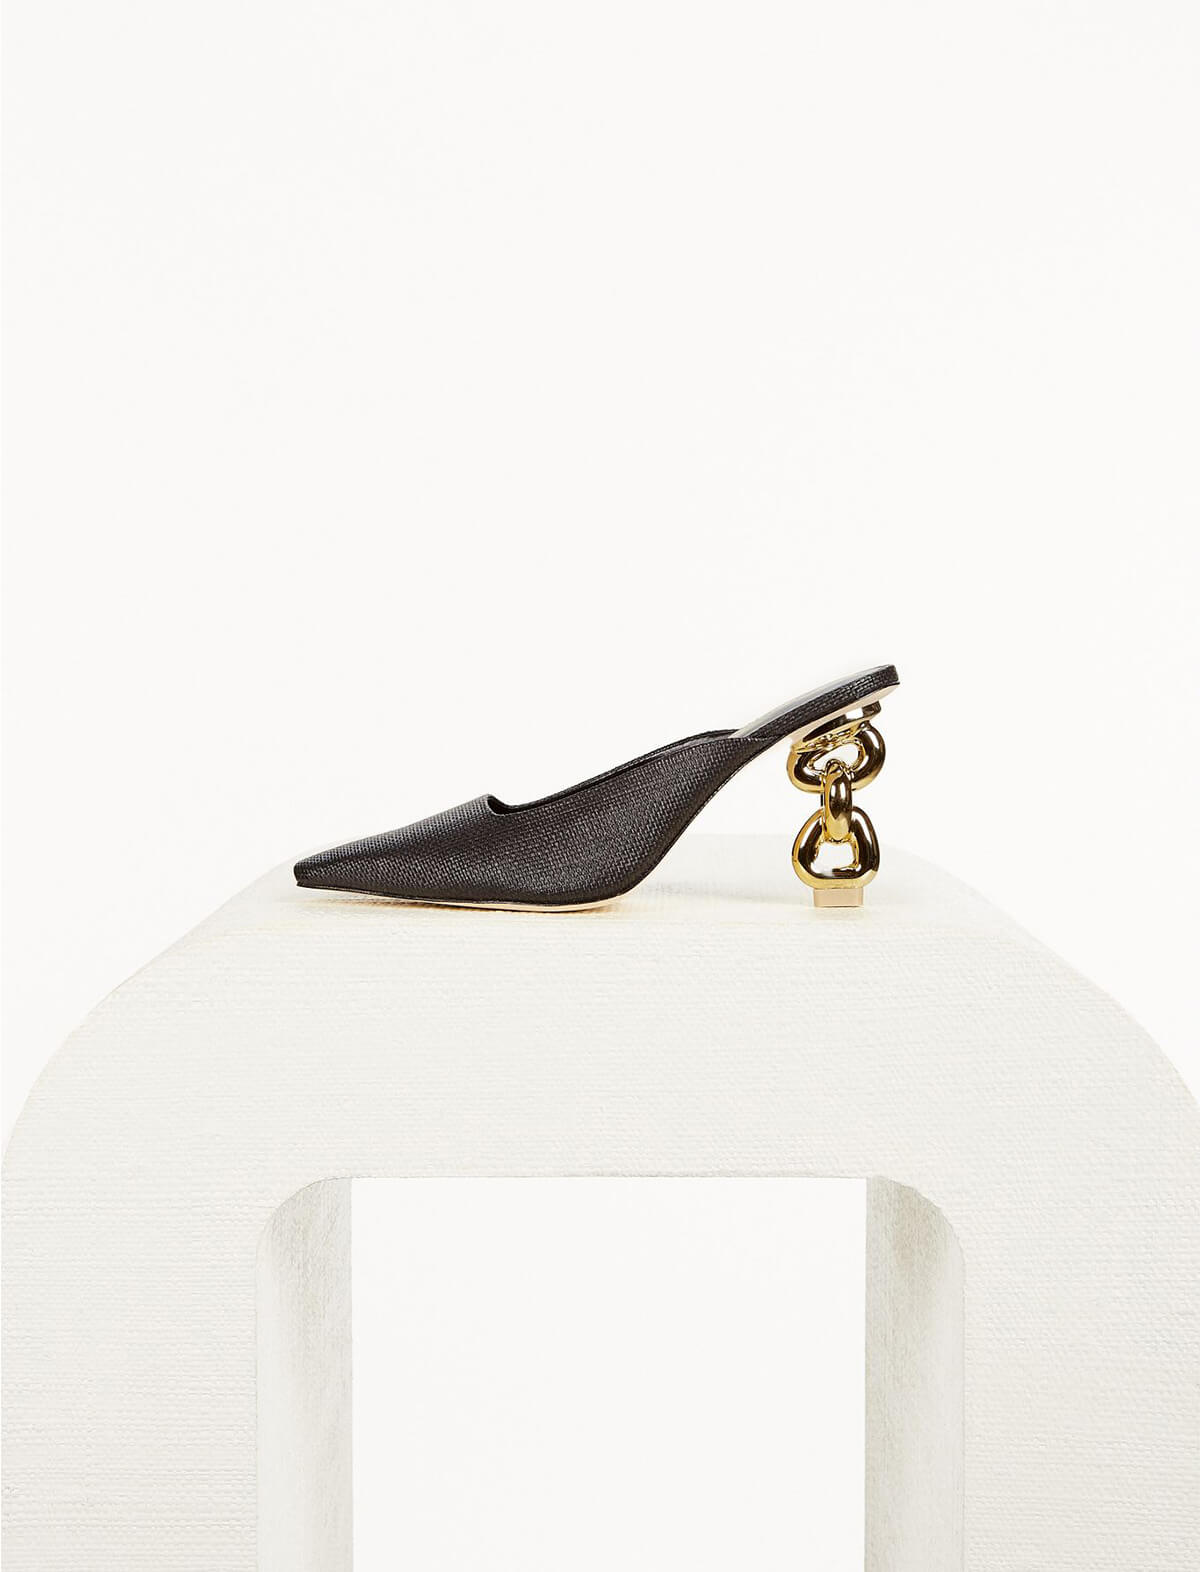 CULT GAIA Harlow Mules in Black and Gold